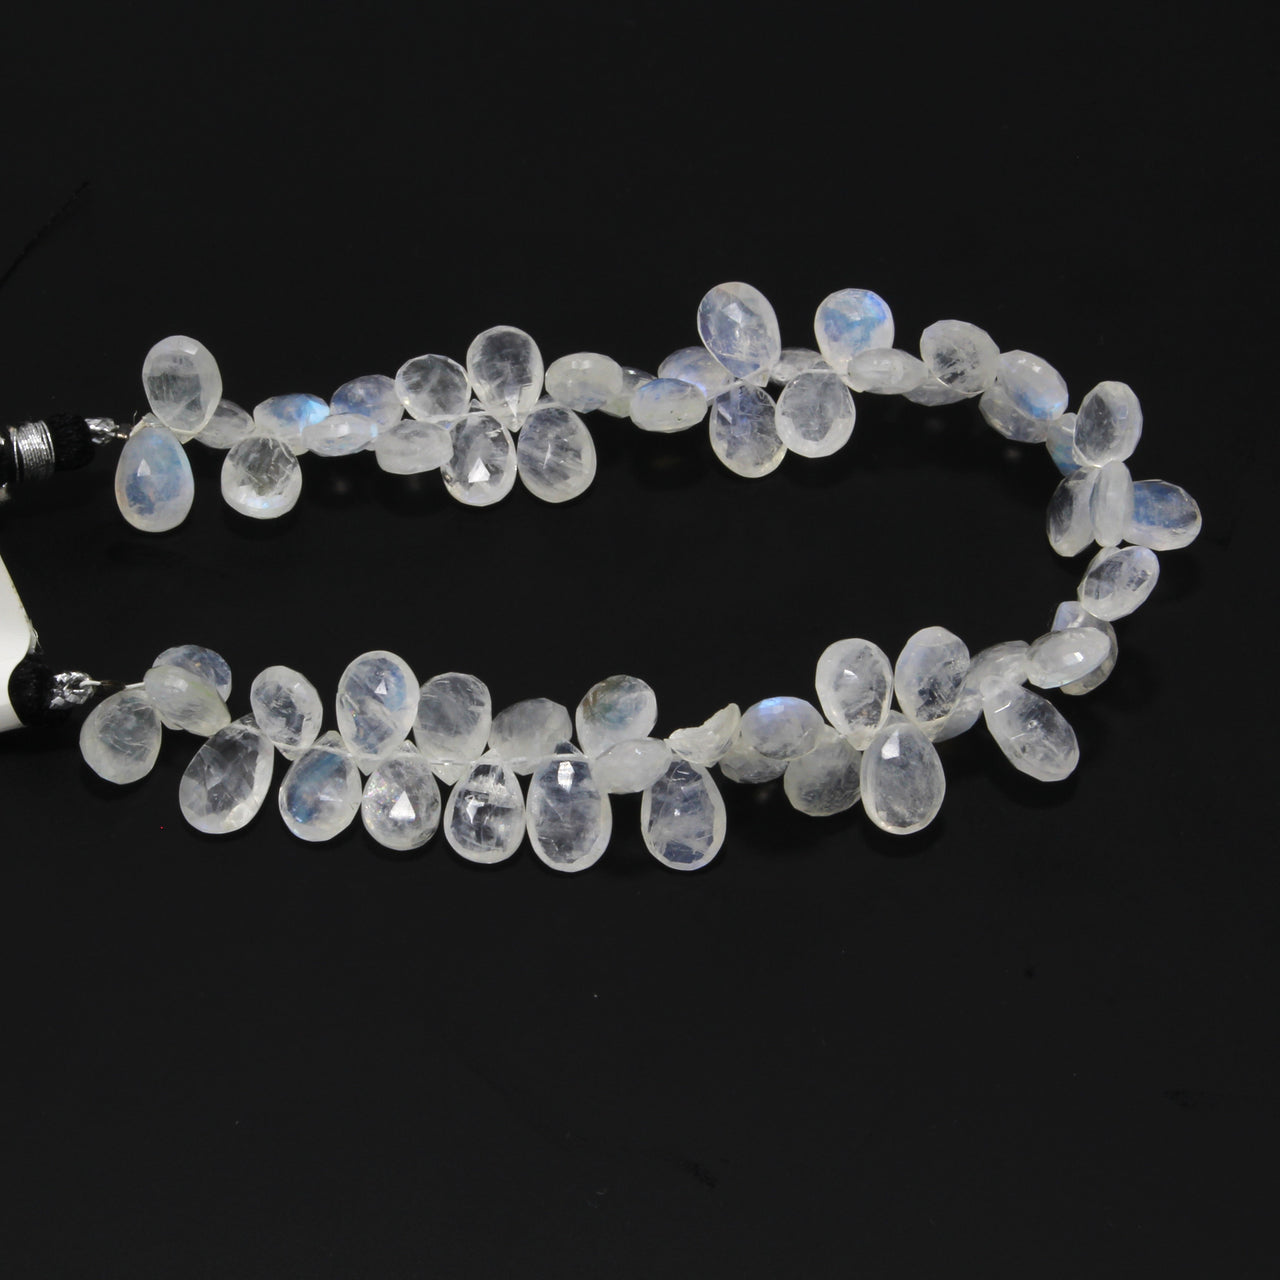 Blue Rainbow Moonstone 9x7mm Faceted Pear Shaped Briolettes 8" Bead Strand